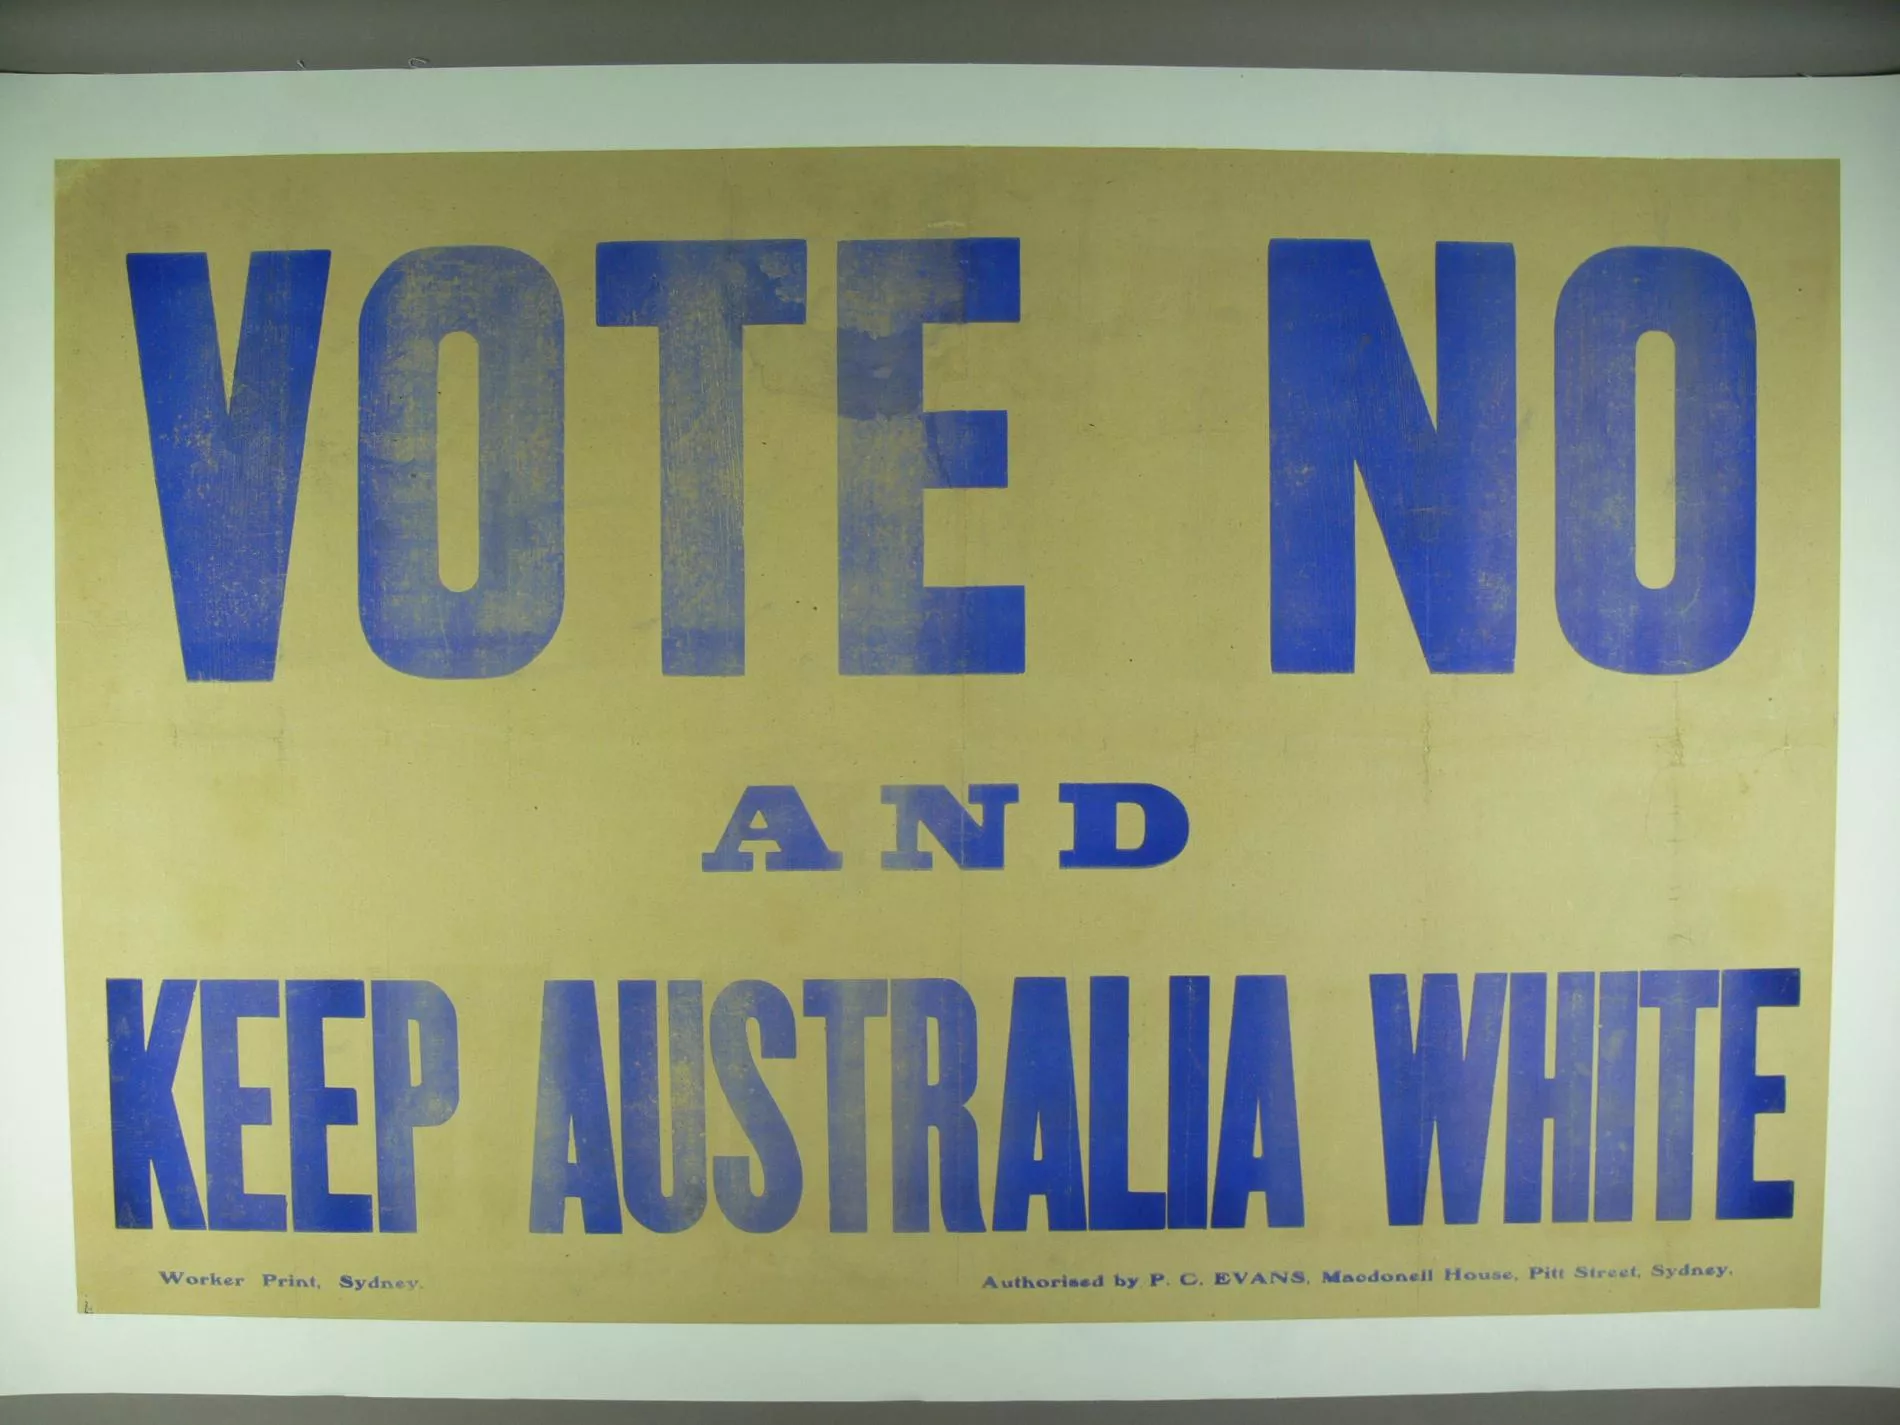 A faded yellow poster with writing in blue capital letters that says ' Vote no and keep Australia white'.